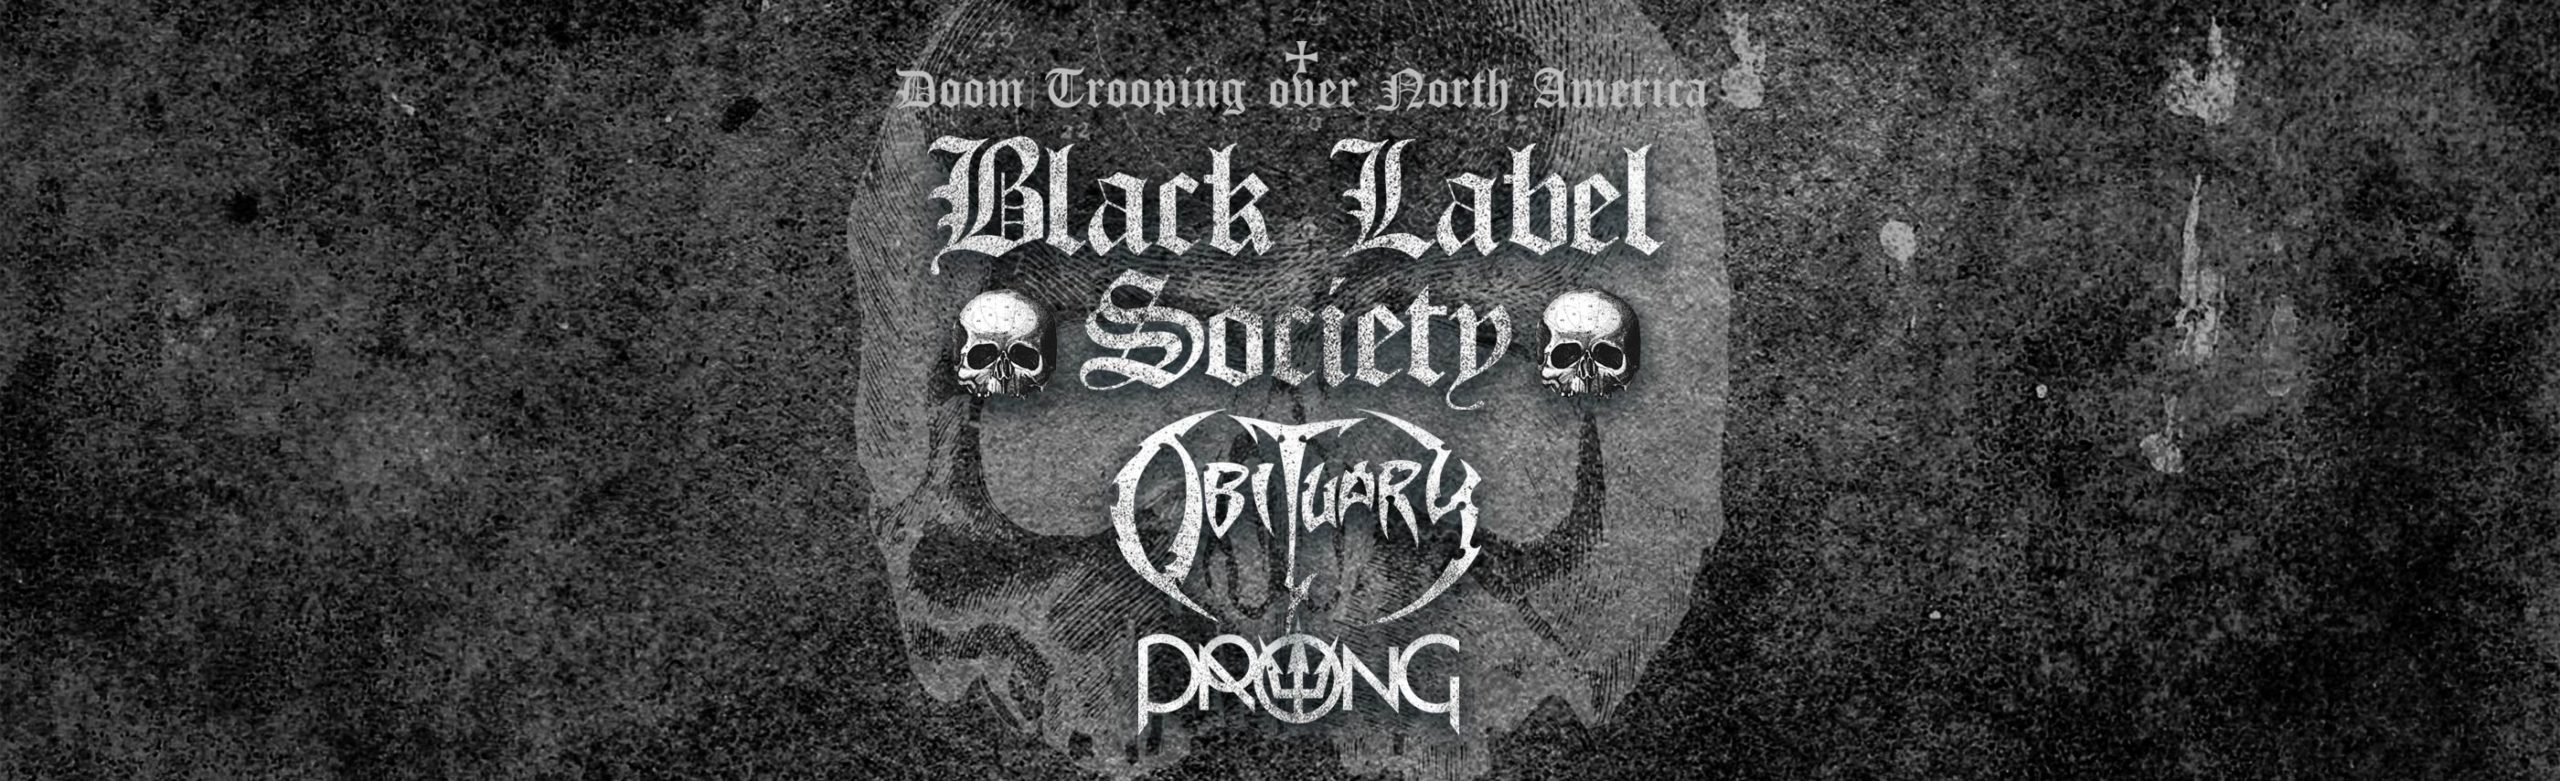 Event Info: Black Label Society at The ELM 2021 Image